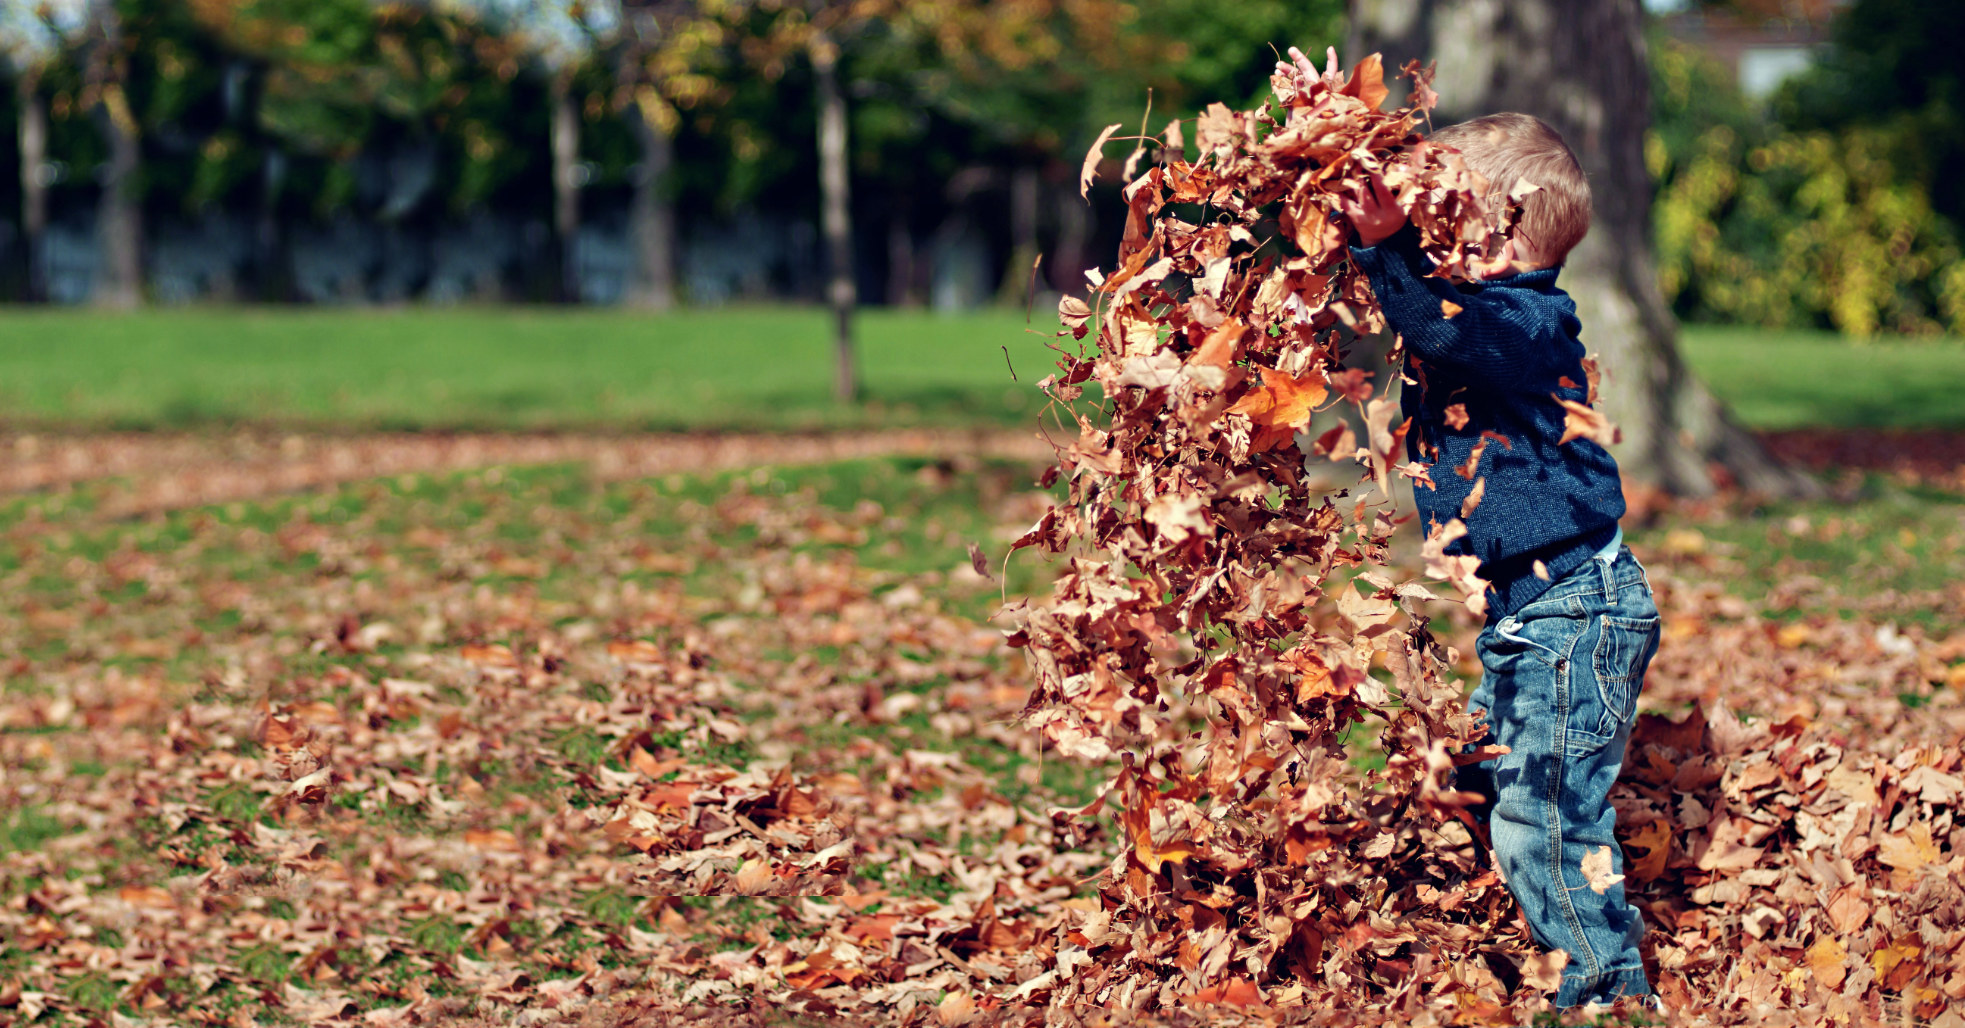 A child standing outside playing in a sea of fallen autumn leaves, having swept a large mass of leaves up in the air, such that the child is partly concealed by the mass of leaves.